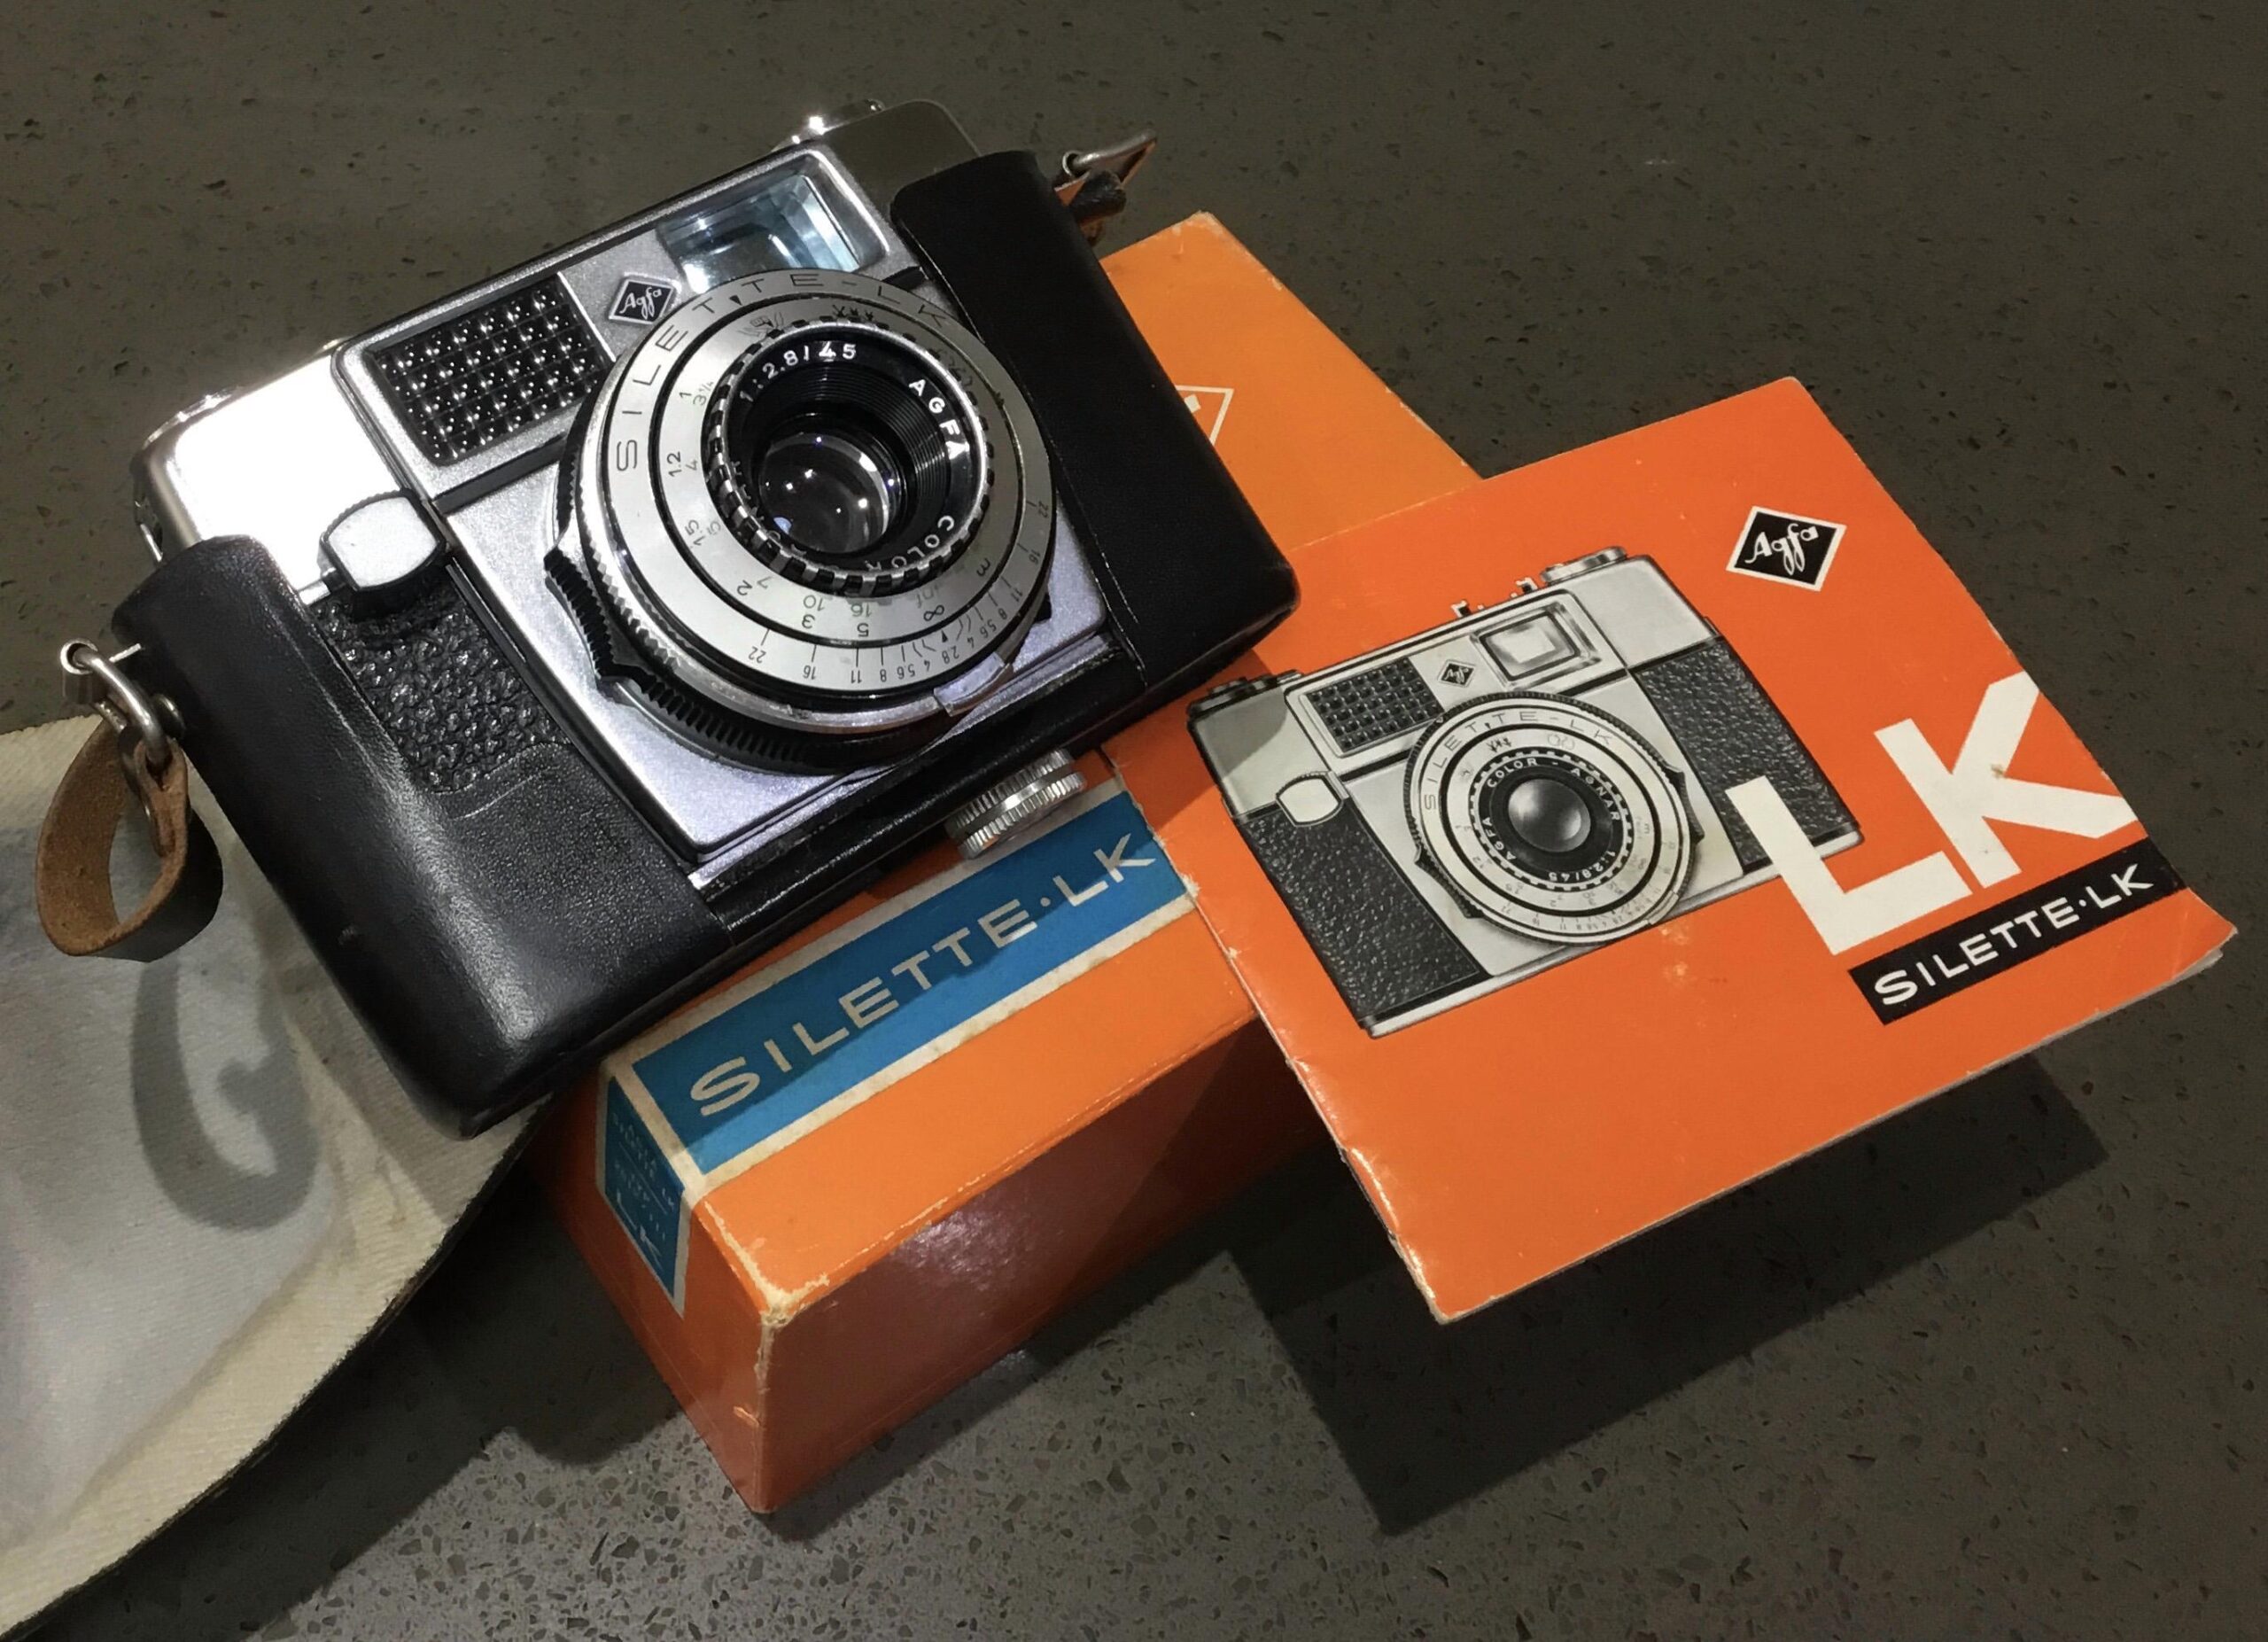 The Agfa Silette LK from the late 1960s and early 1970s. How many of us started our photography journey with this camera?